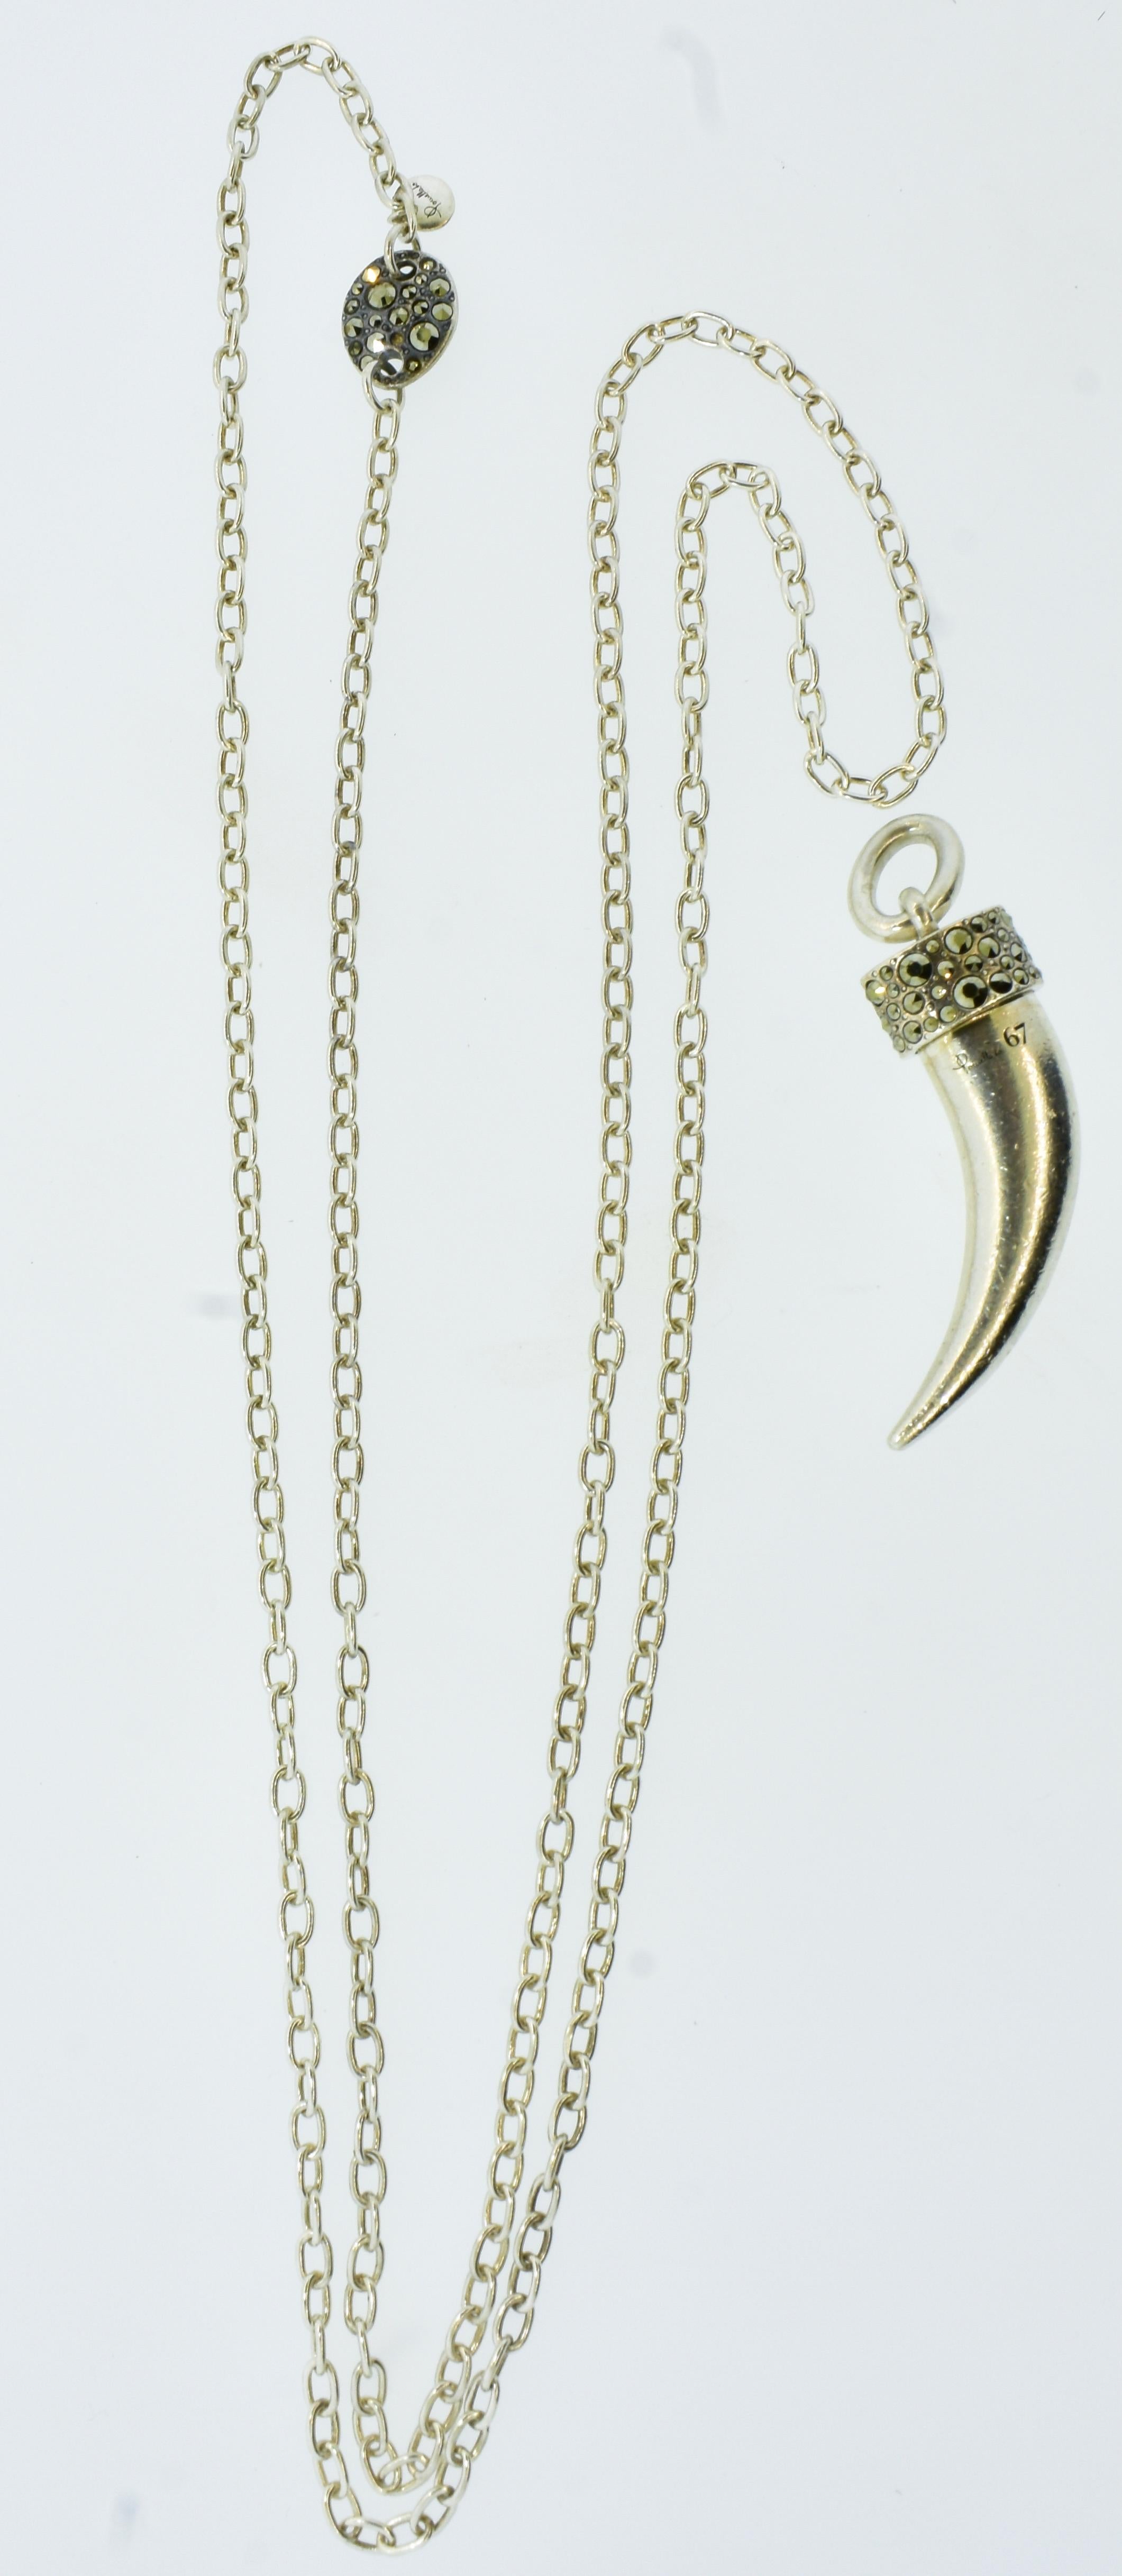 Contemporary Pomellato 67 Sterling Silver & Marcasite Necklace Suspending a Horn of Plenty For Sale